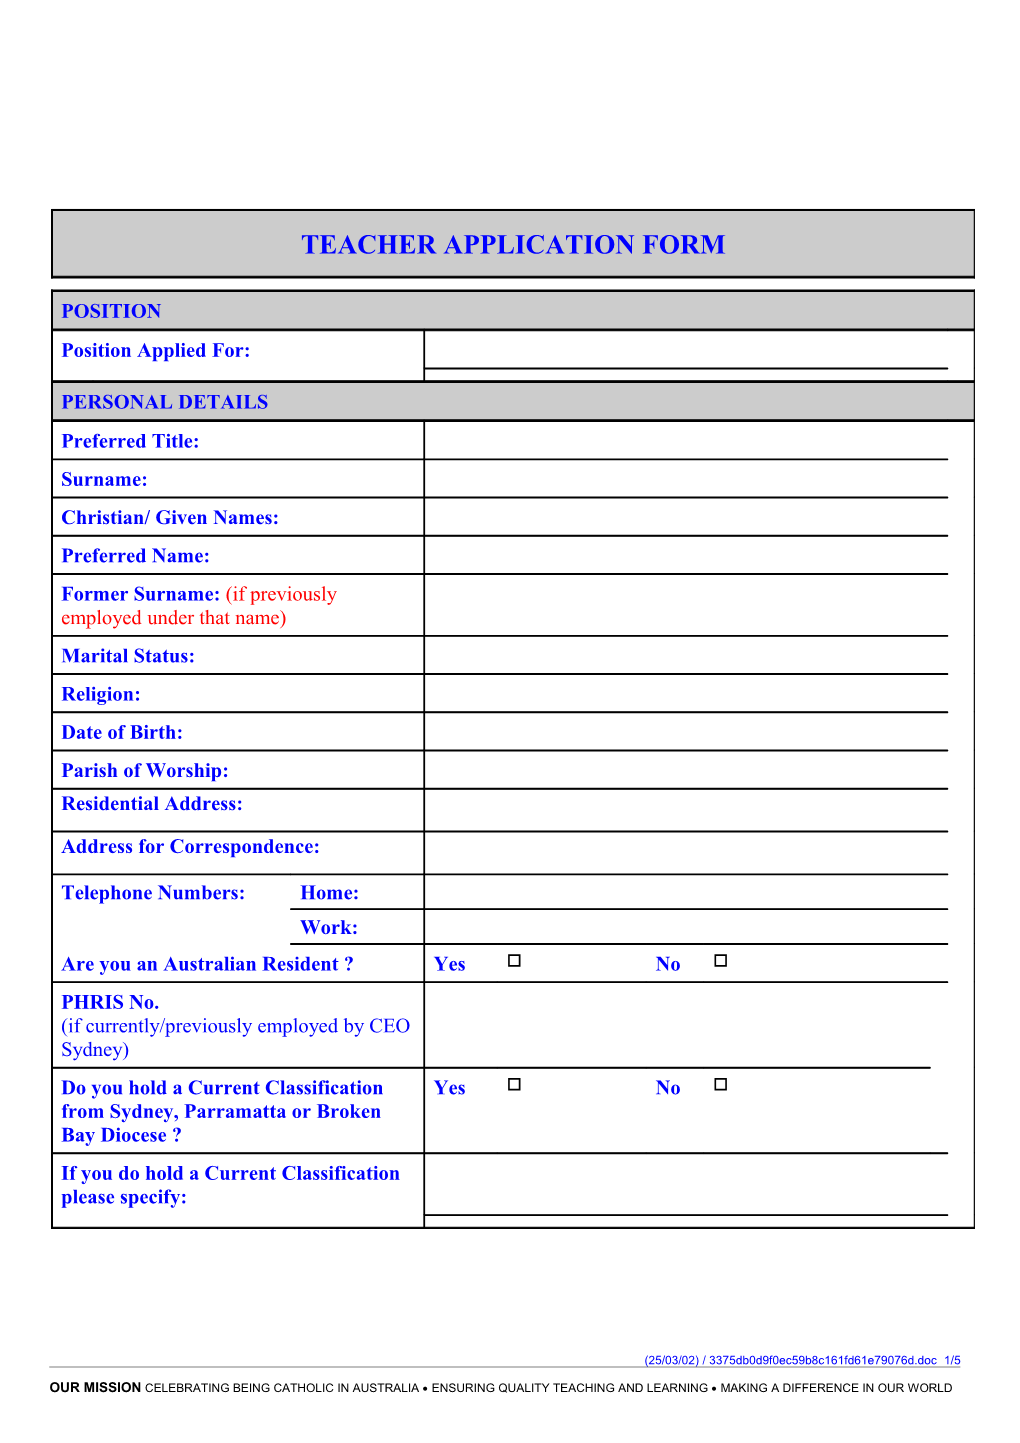 GENERAL APPLICATION FORM 25/03/2002. Same As Hr00401a Except Unprotected So School May